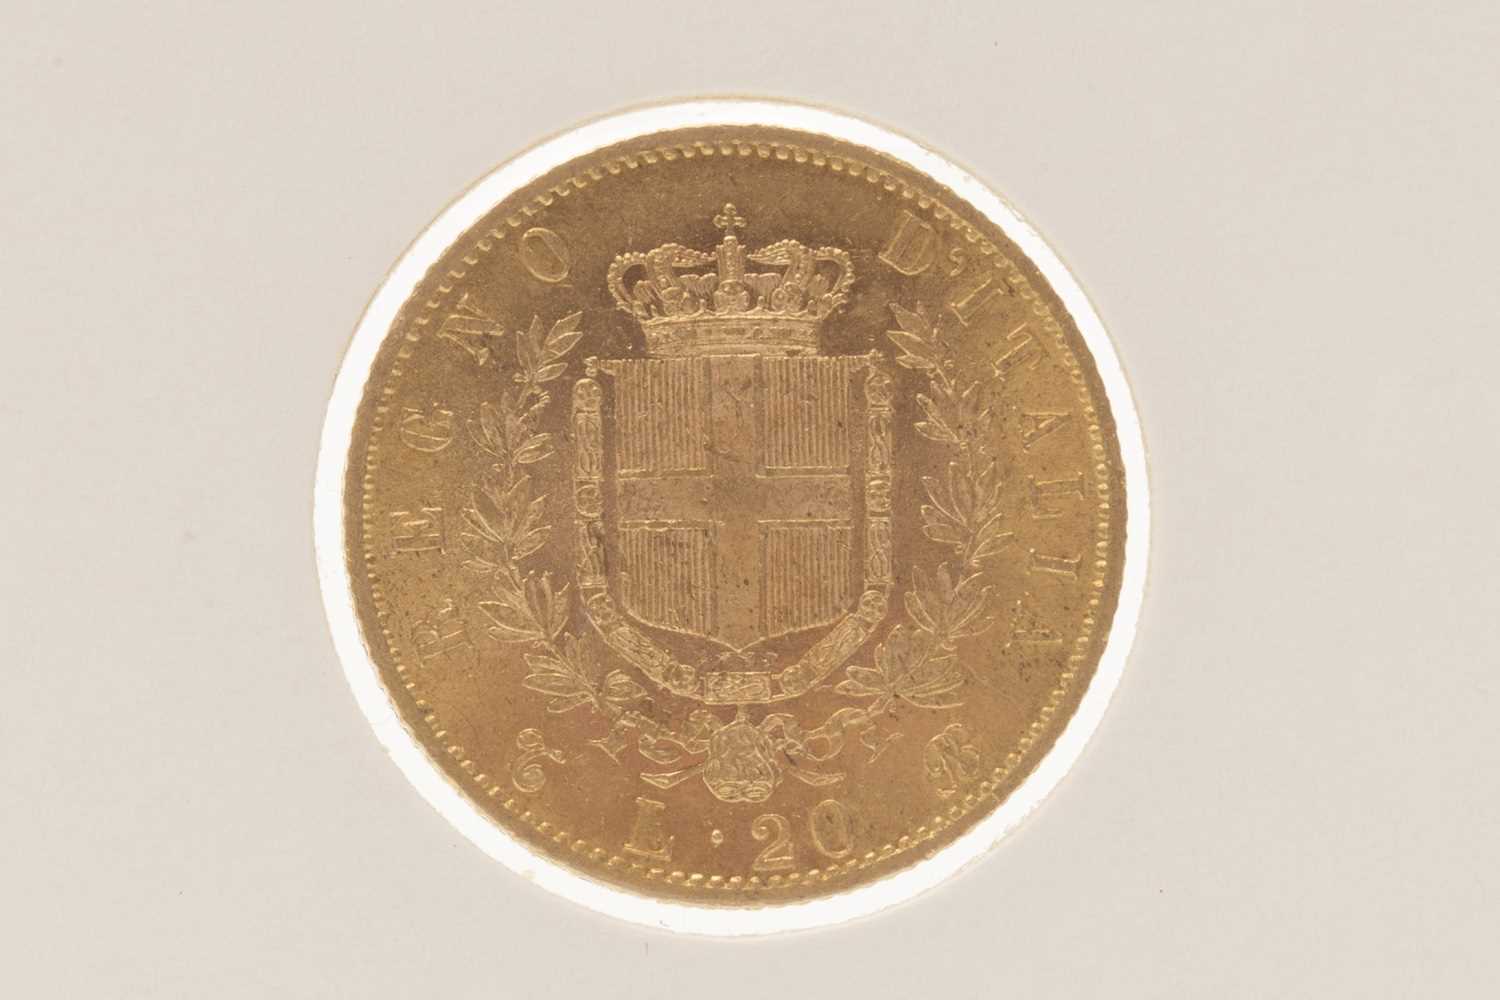 Lot 570 - A GOLD 20 LIRE COIN, 1863